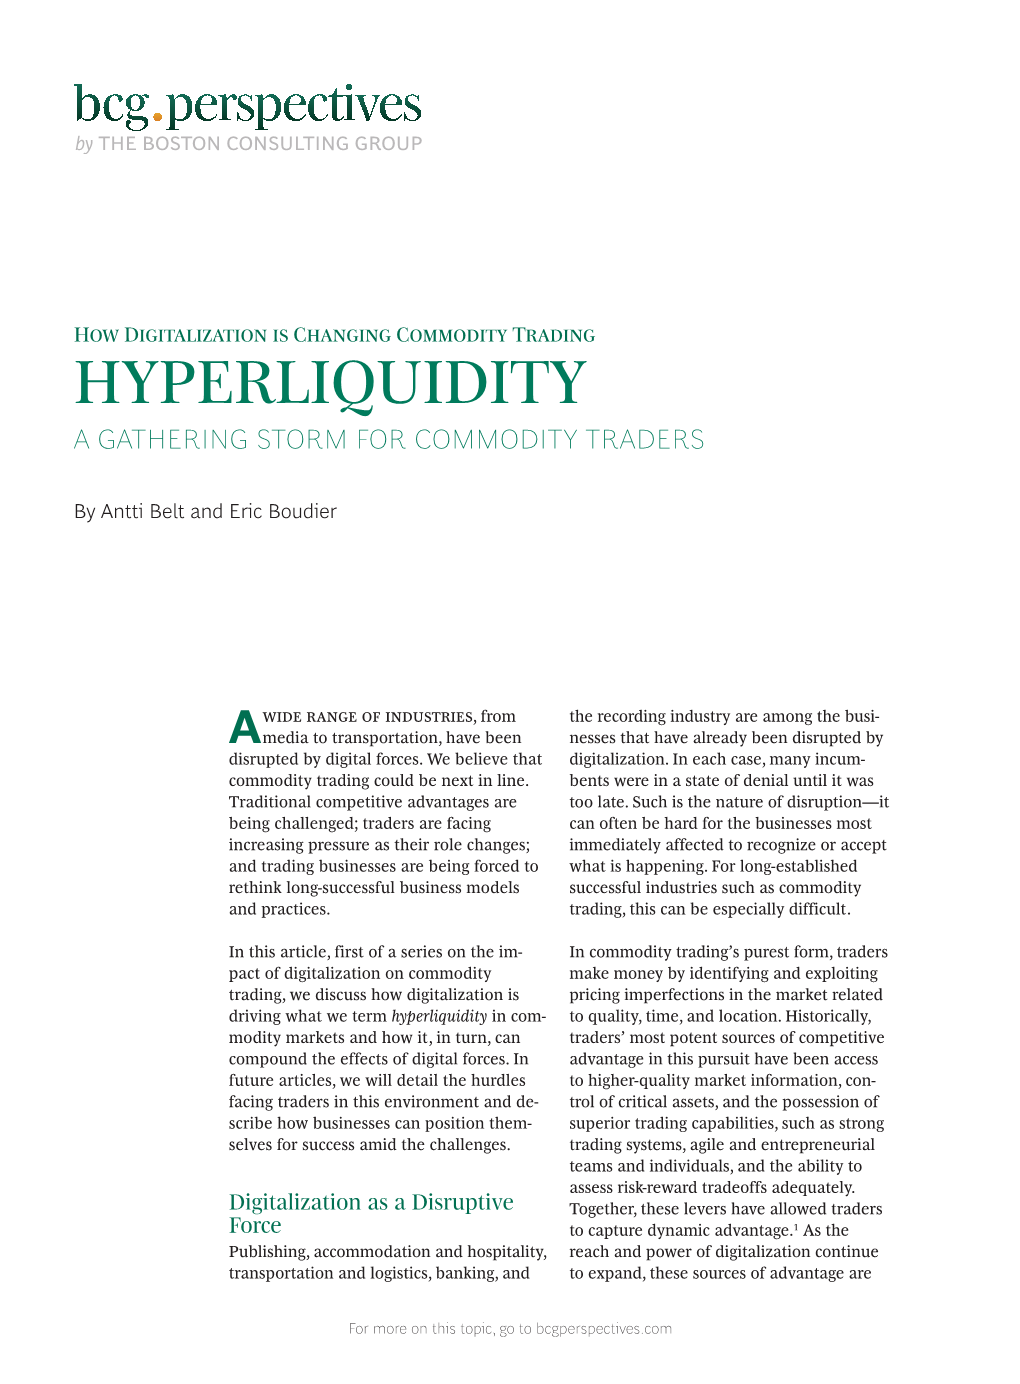 Hyperliquidity: a Gathering Storm for Commodity Traders